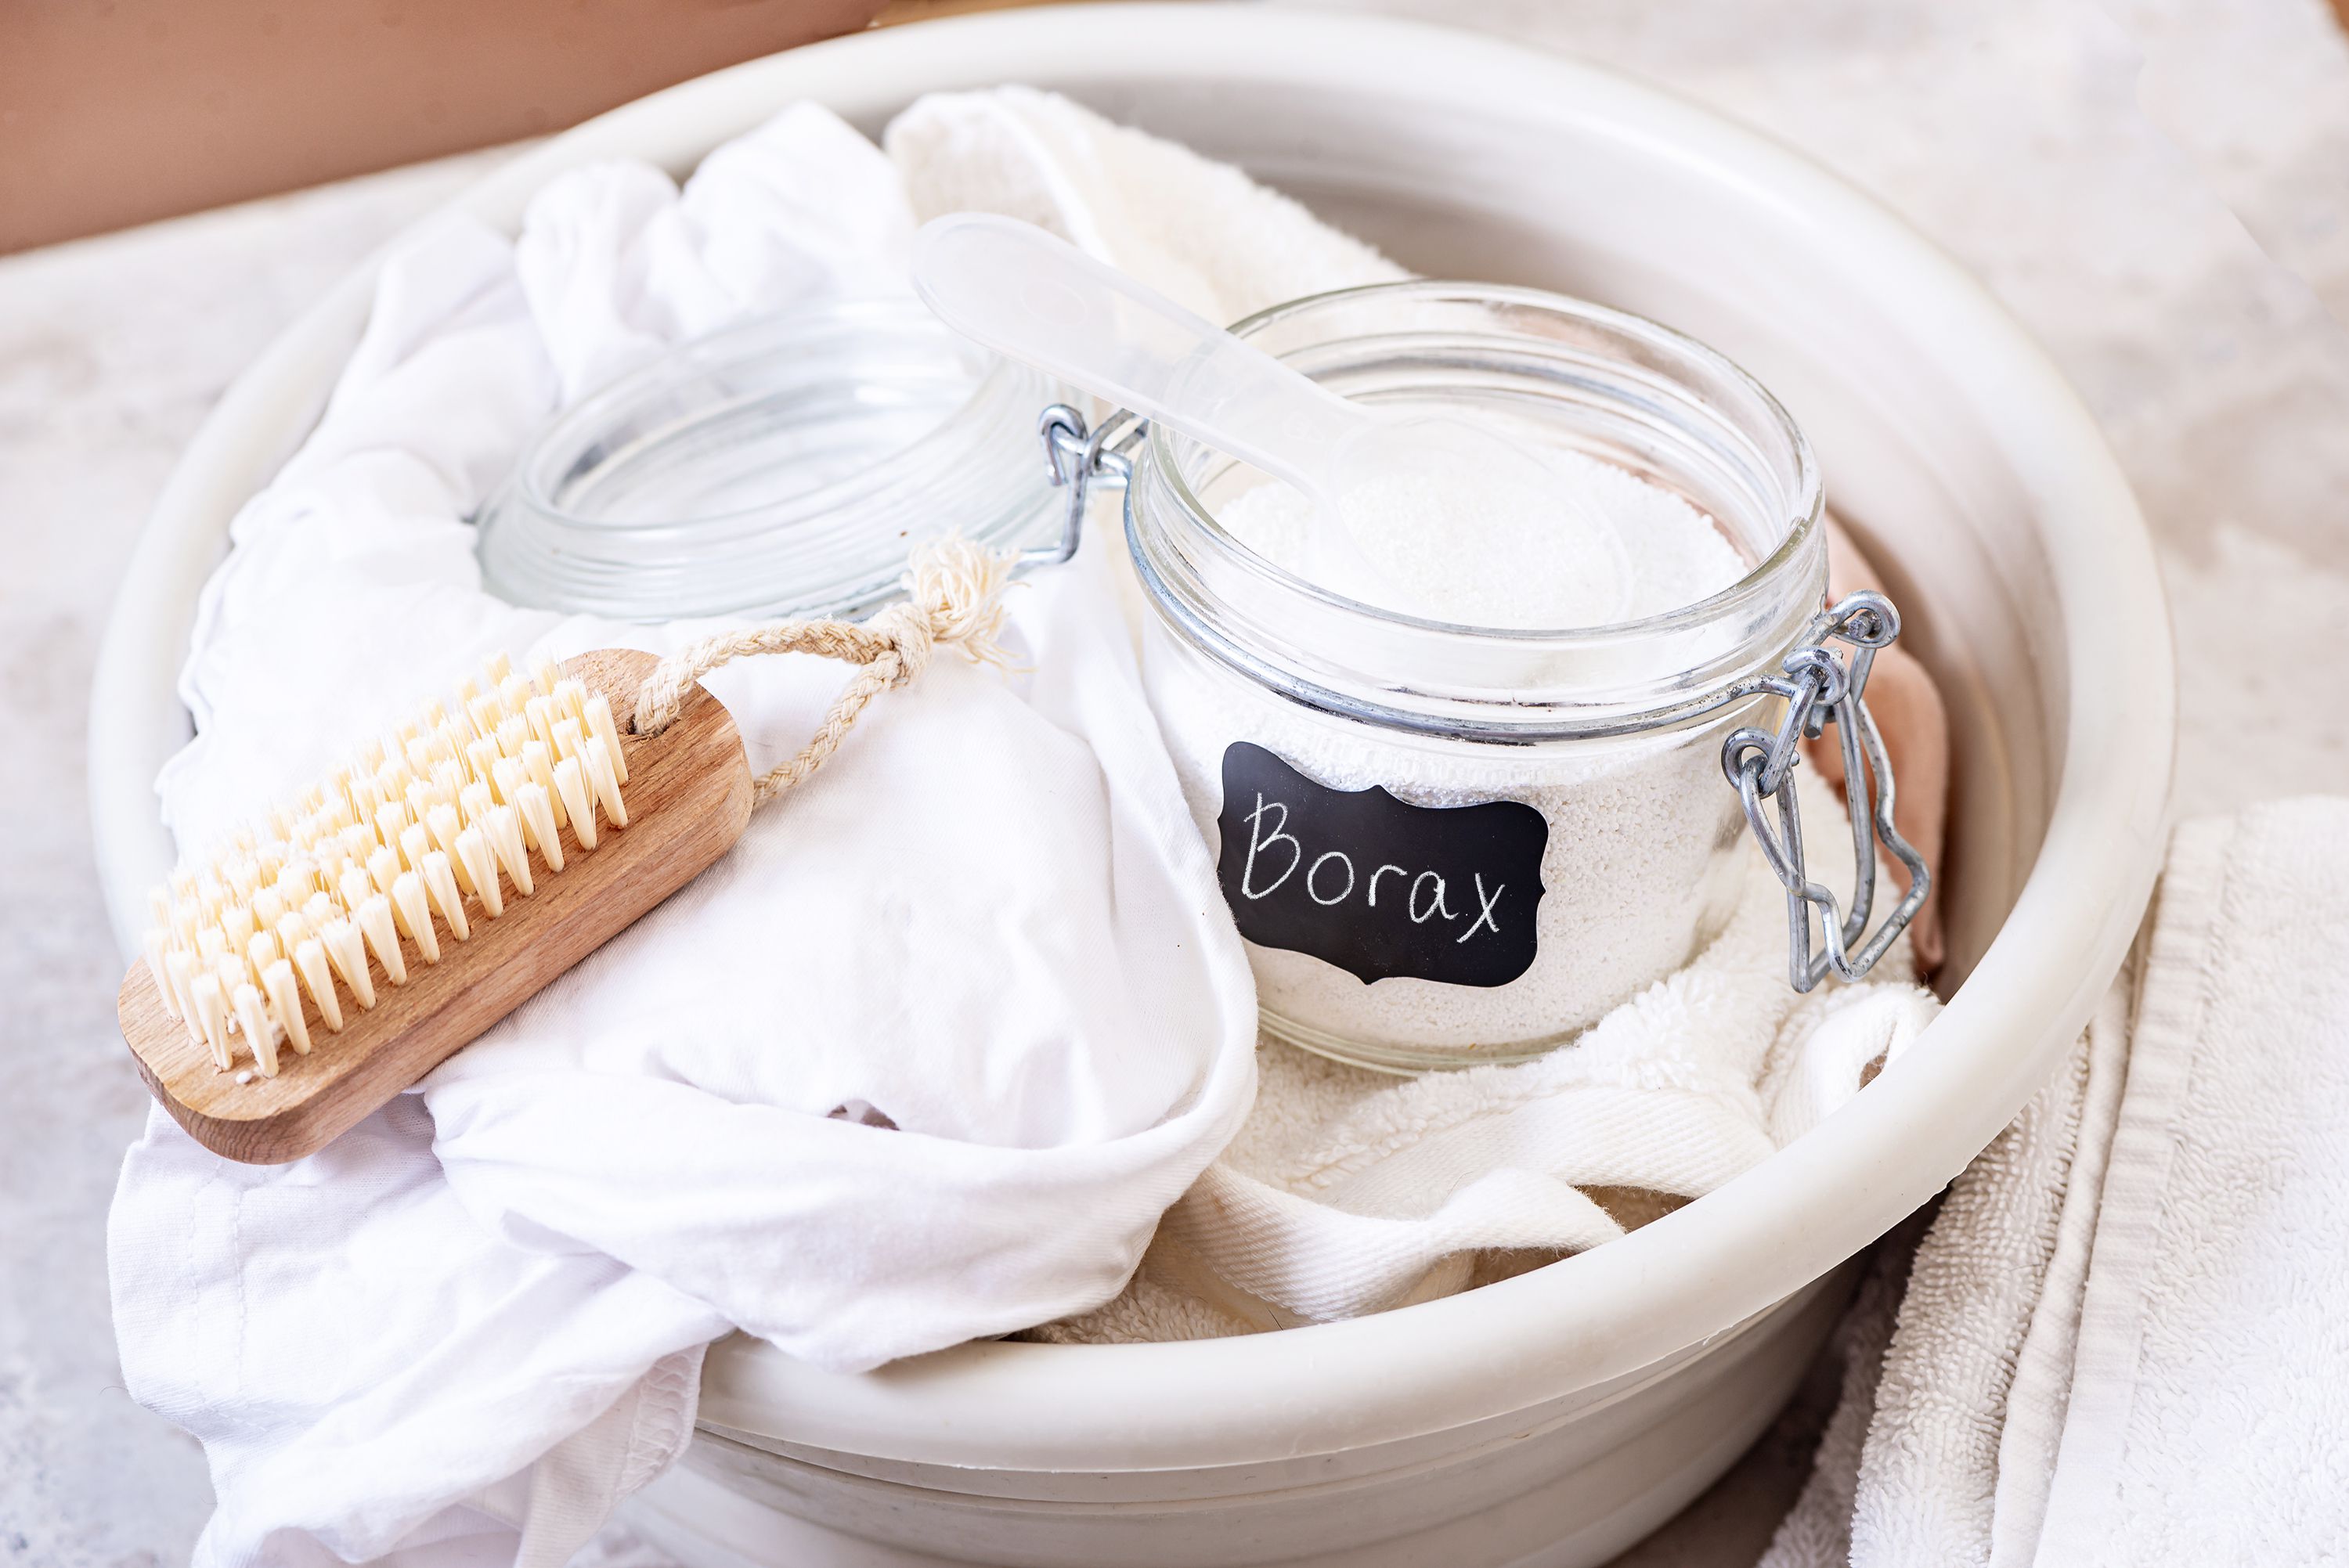 Frugal Uses for Borax Around the House